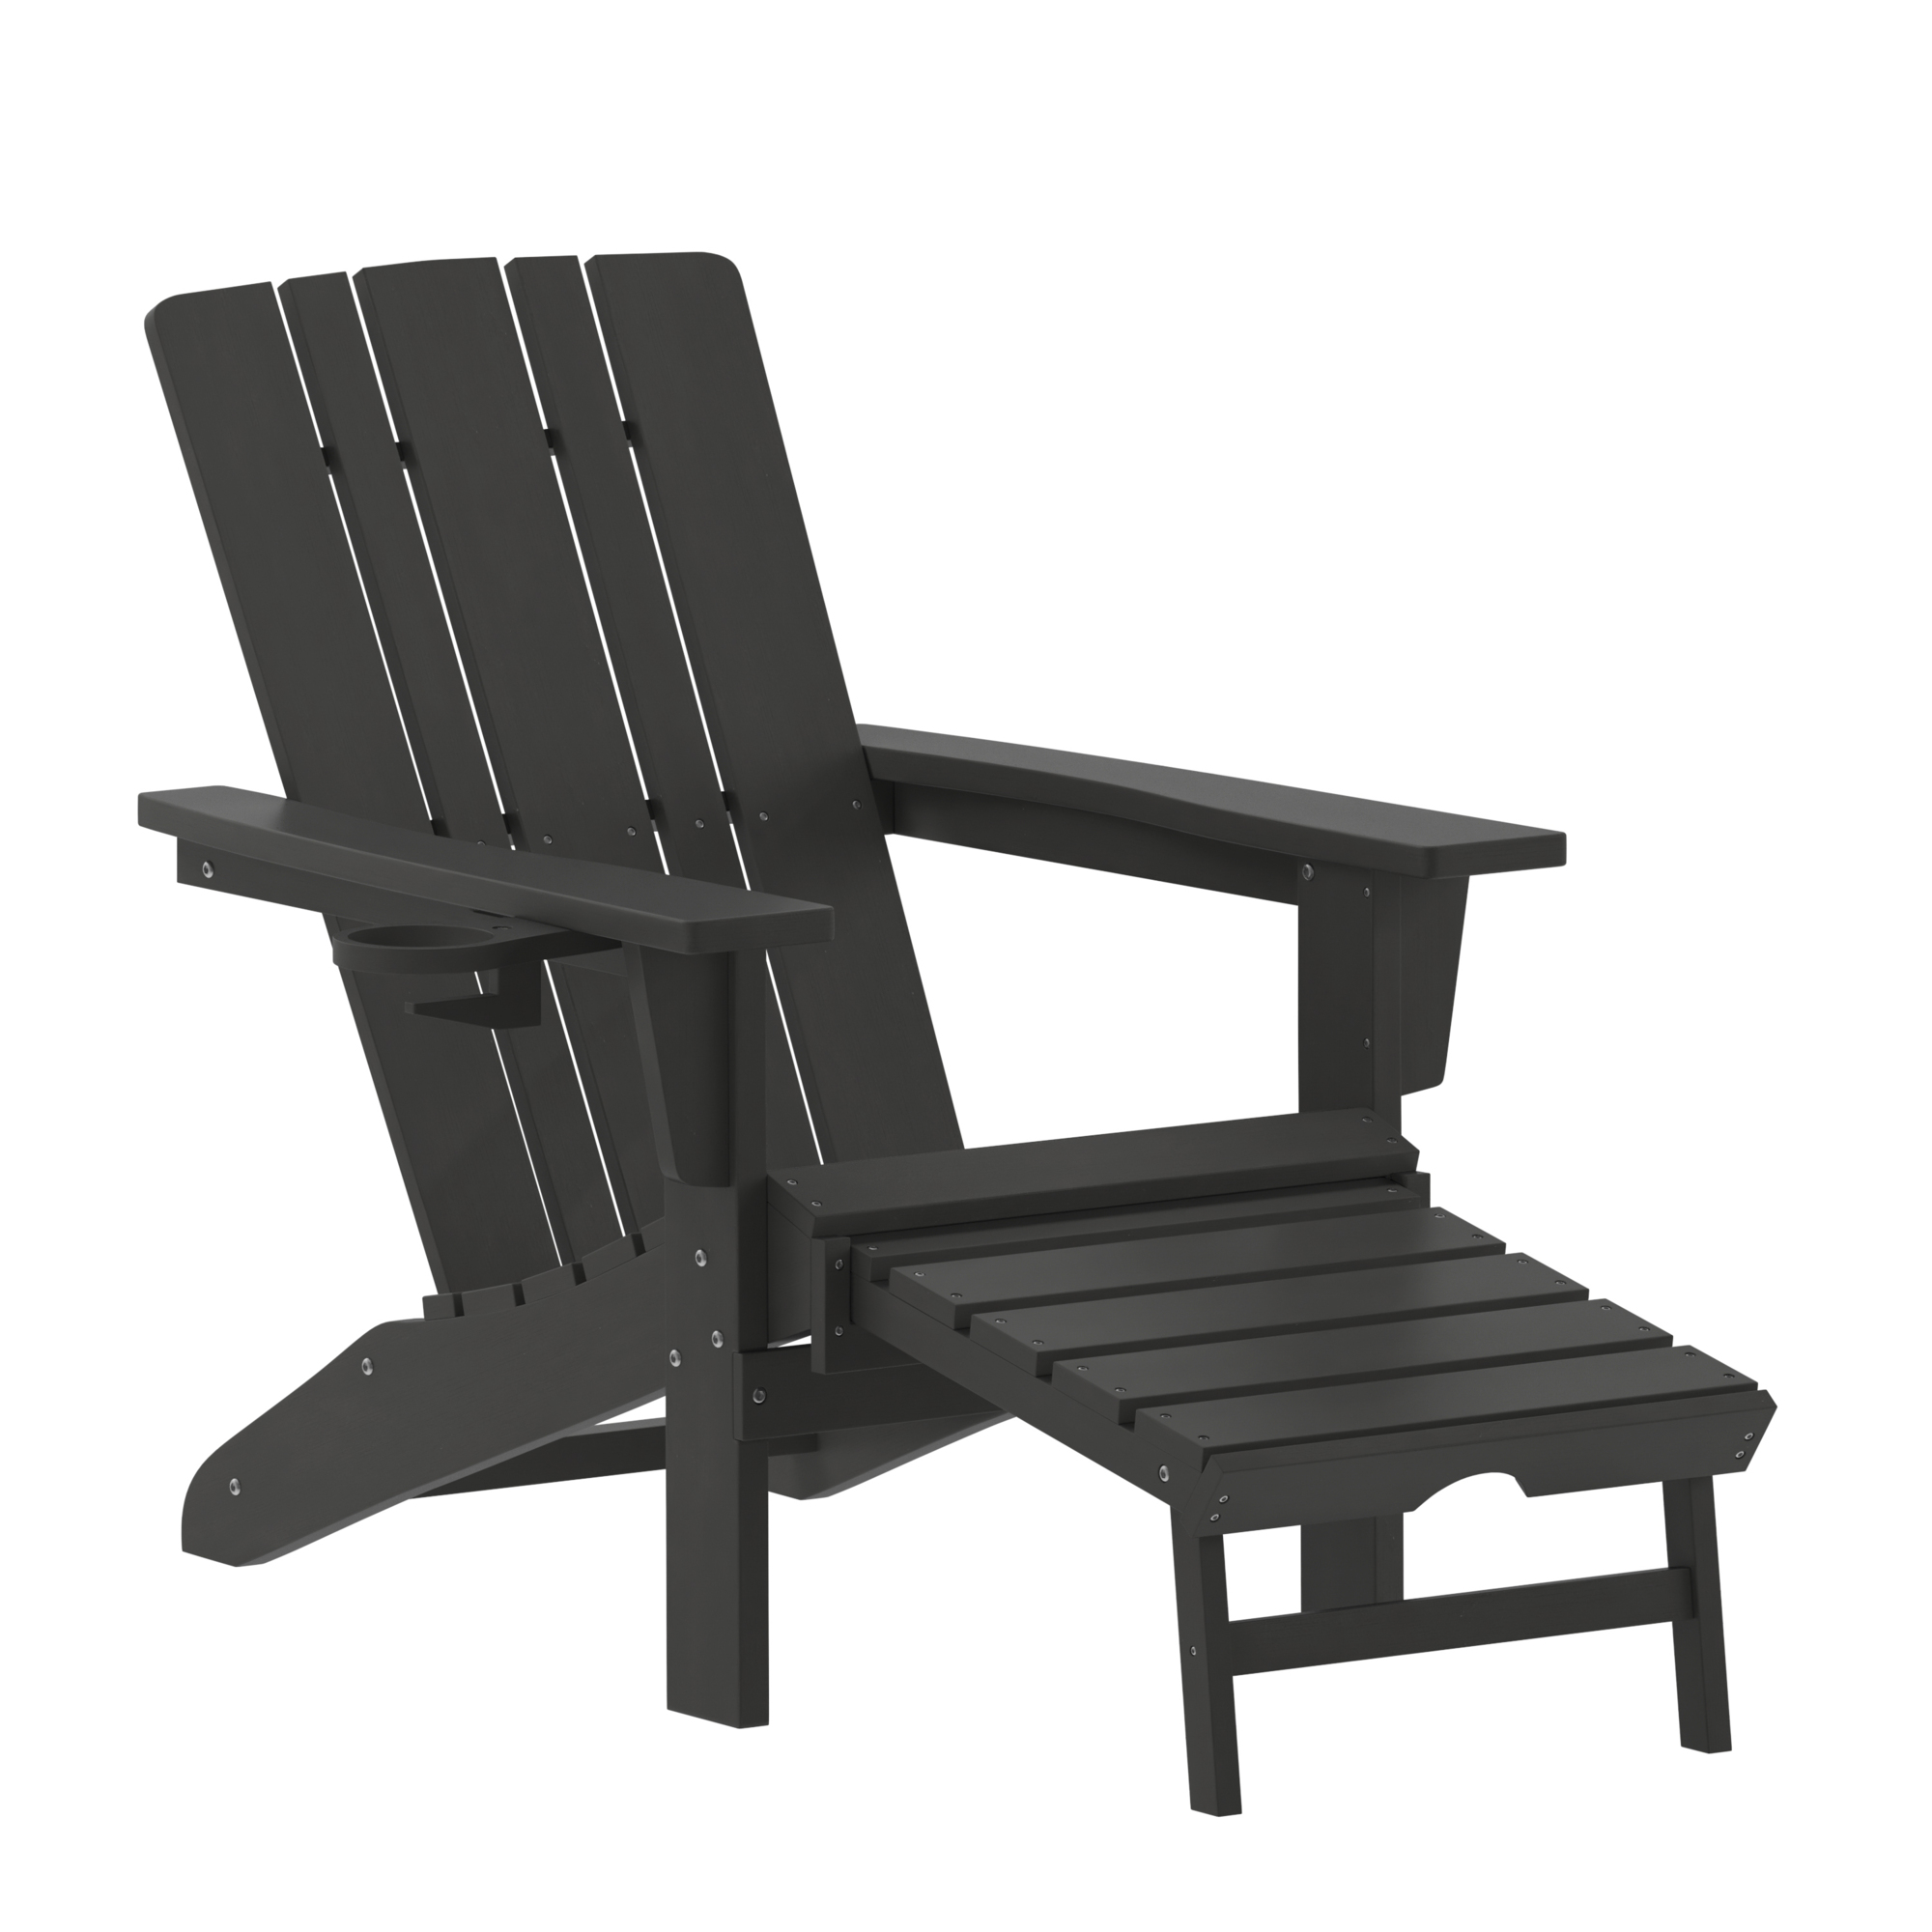 Flash Furniture, Black Adirondack Chair with Ottoman and Cupholder, Primary Color Black, Material HDPE, Width 33.75 in, Model LEHMP1045110BK